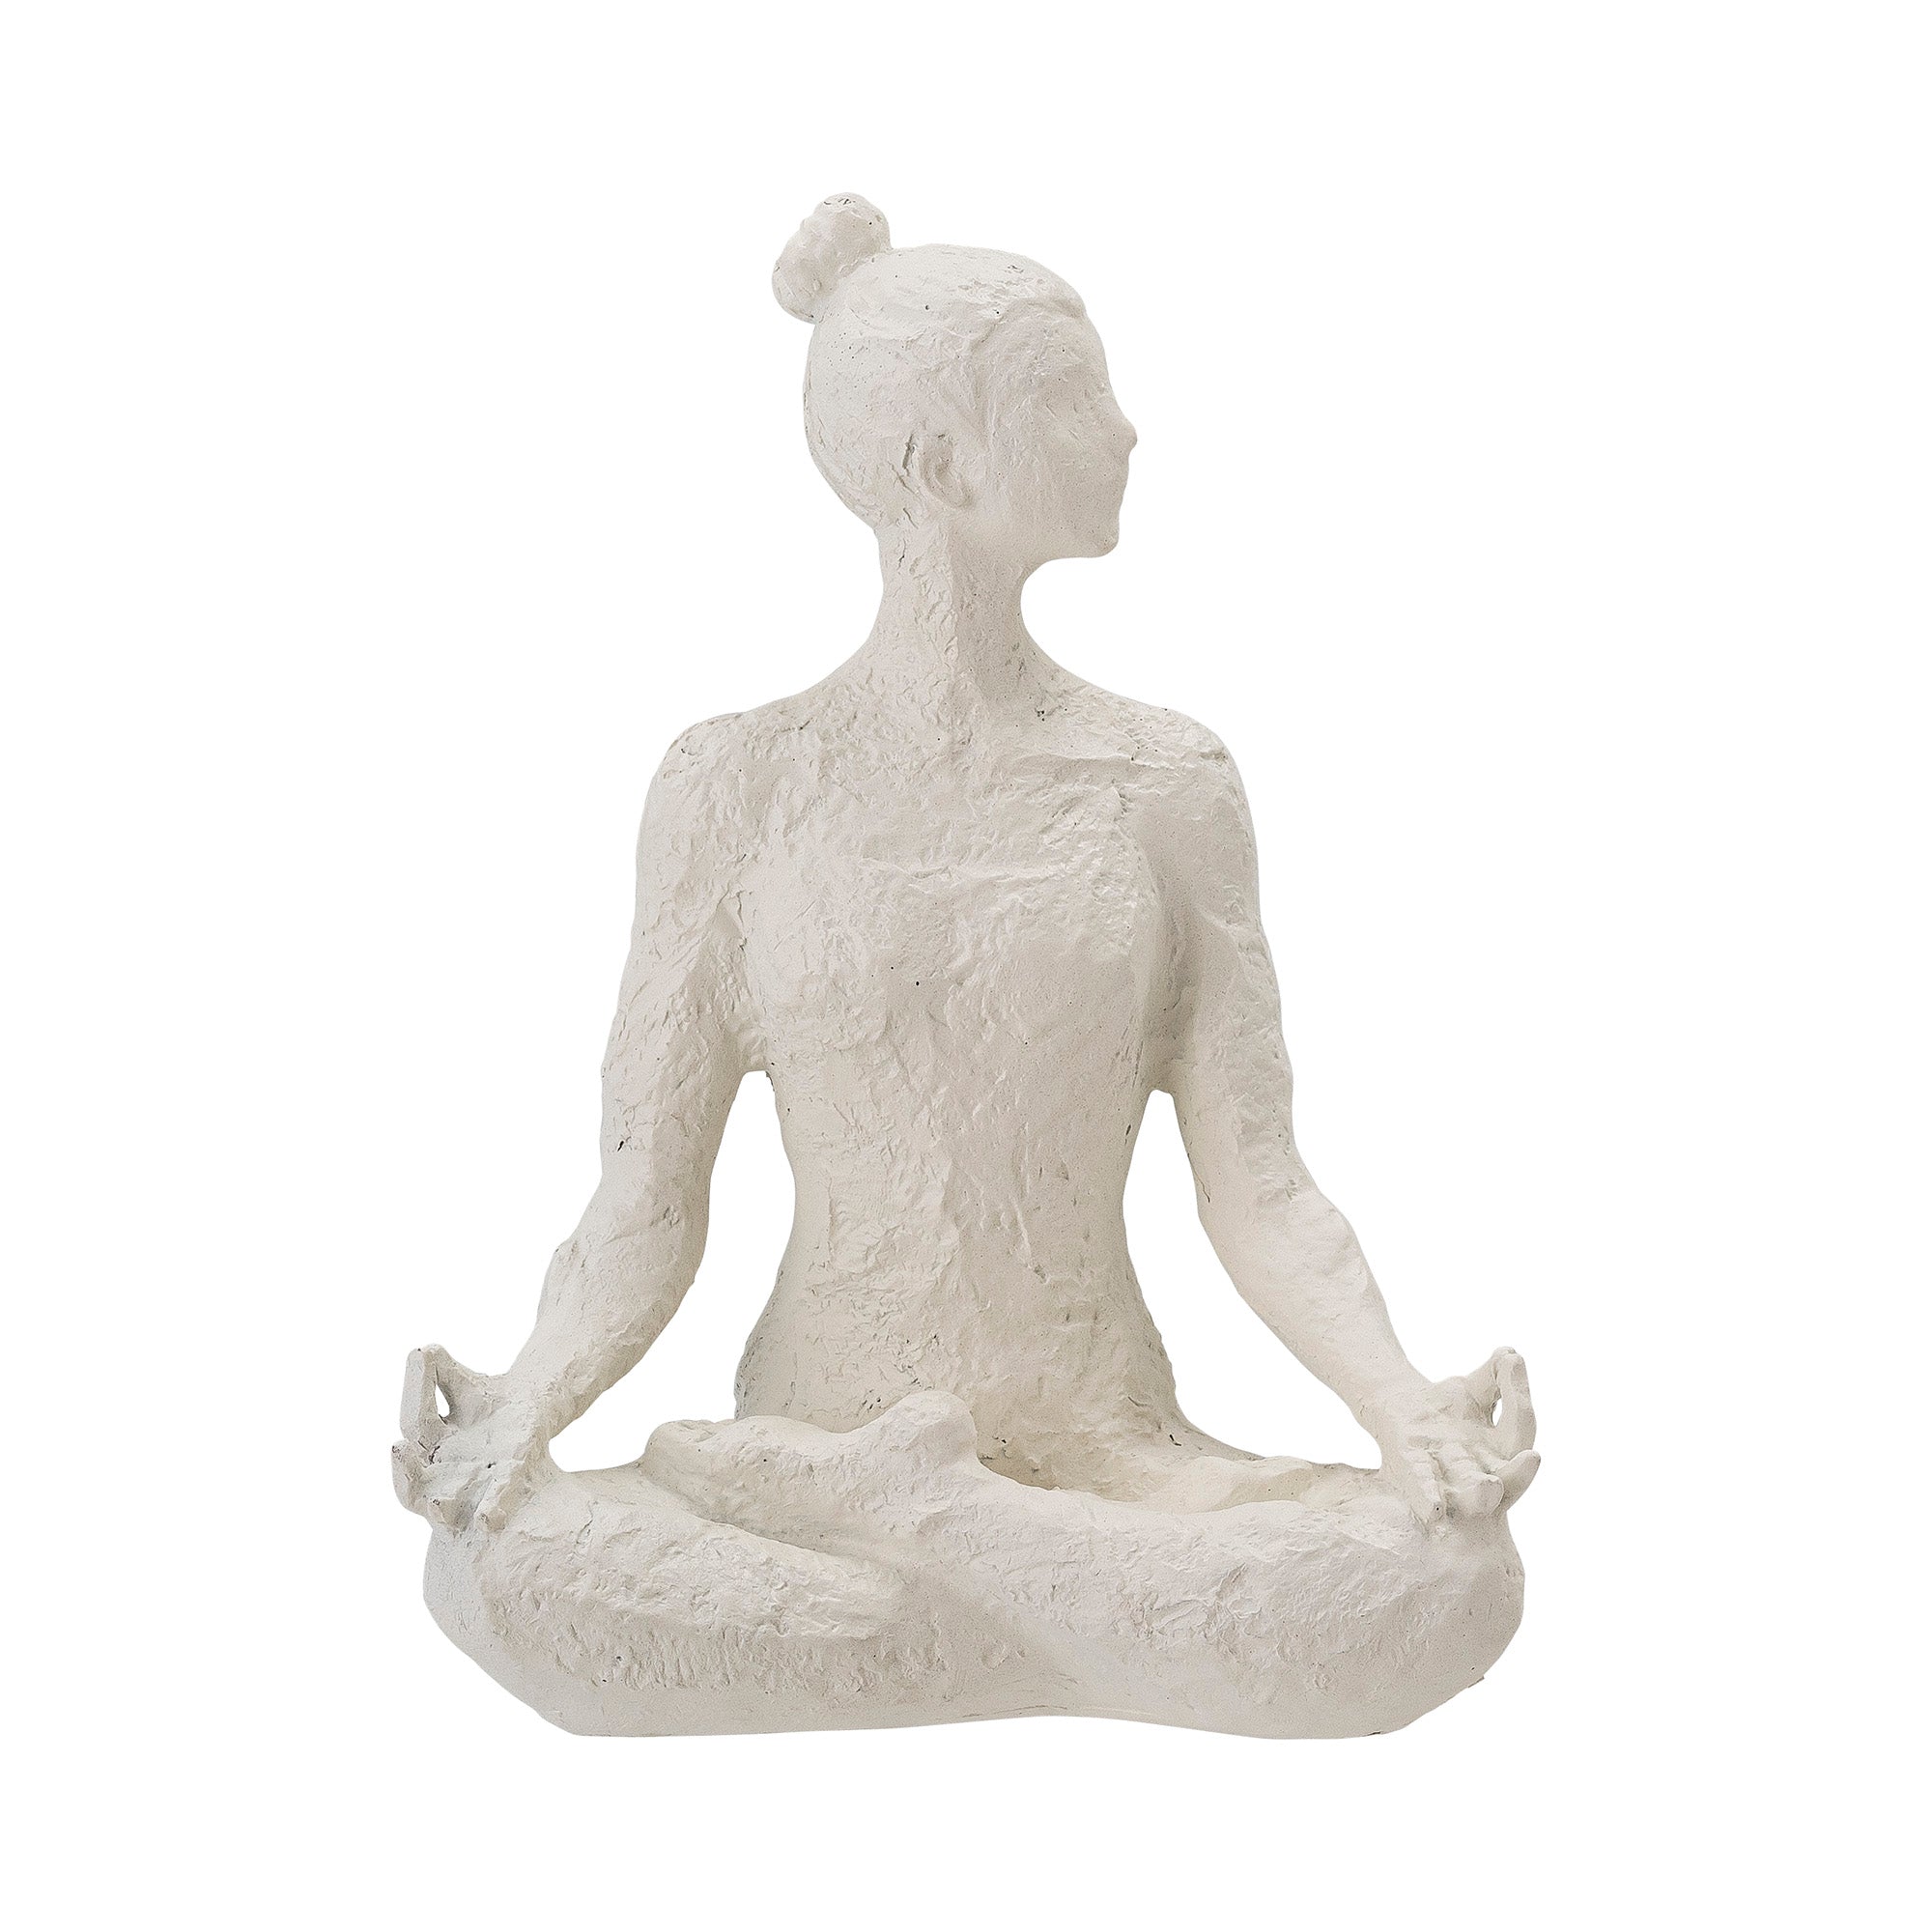 Adalina is a beautiful, white sculpture from the polyżywica, depicting yogi. In full concentration, with arms folded, he devotes himself to the peaceful meditation. This is a unique decoration with a heterogeneous texture that will help create a home and cozy atmosphere in your interior. It can be easily combined with other decorations to diversify the arrangement.